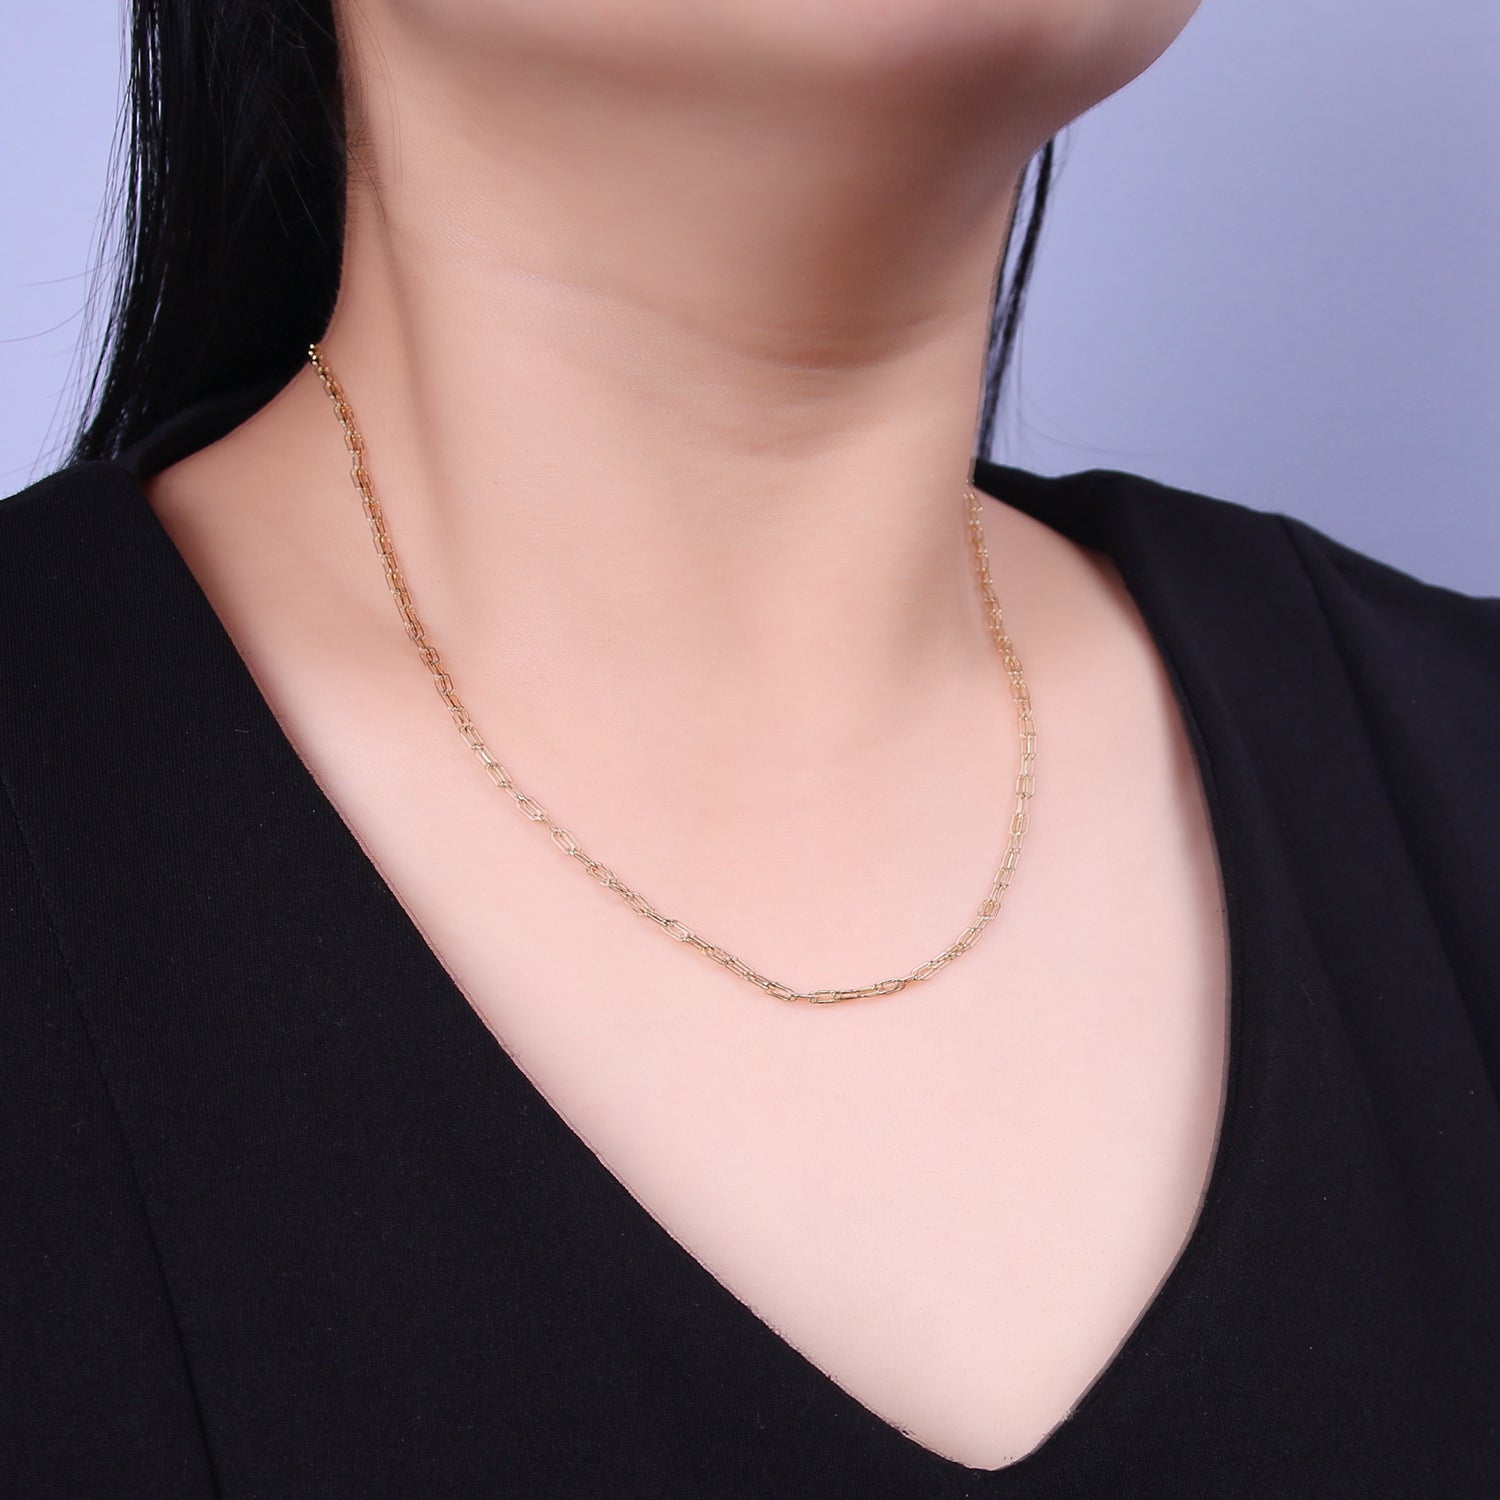 Dainty Paper Clip Chain Necklace ∙ 14K Gold Filled Necklace Cable Link Chain 18 inch + 2.5 inch extender Ready to Wear  WA-889 - DLUXCA